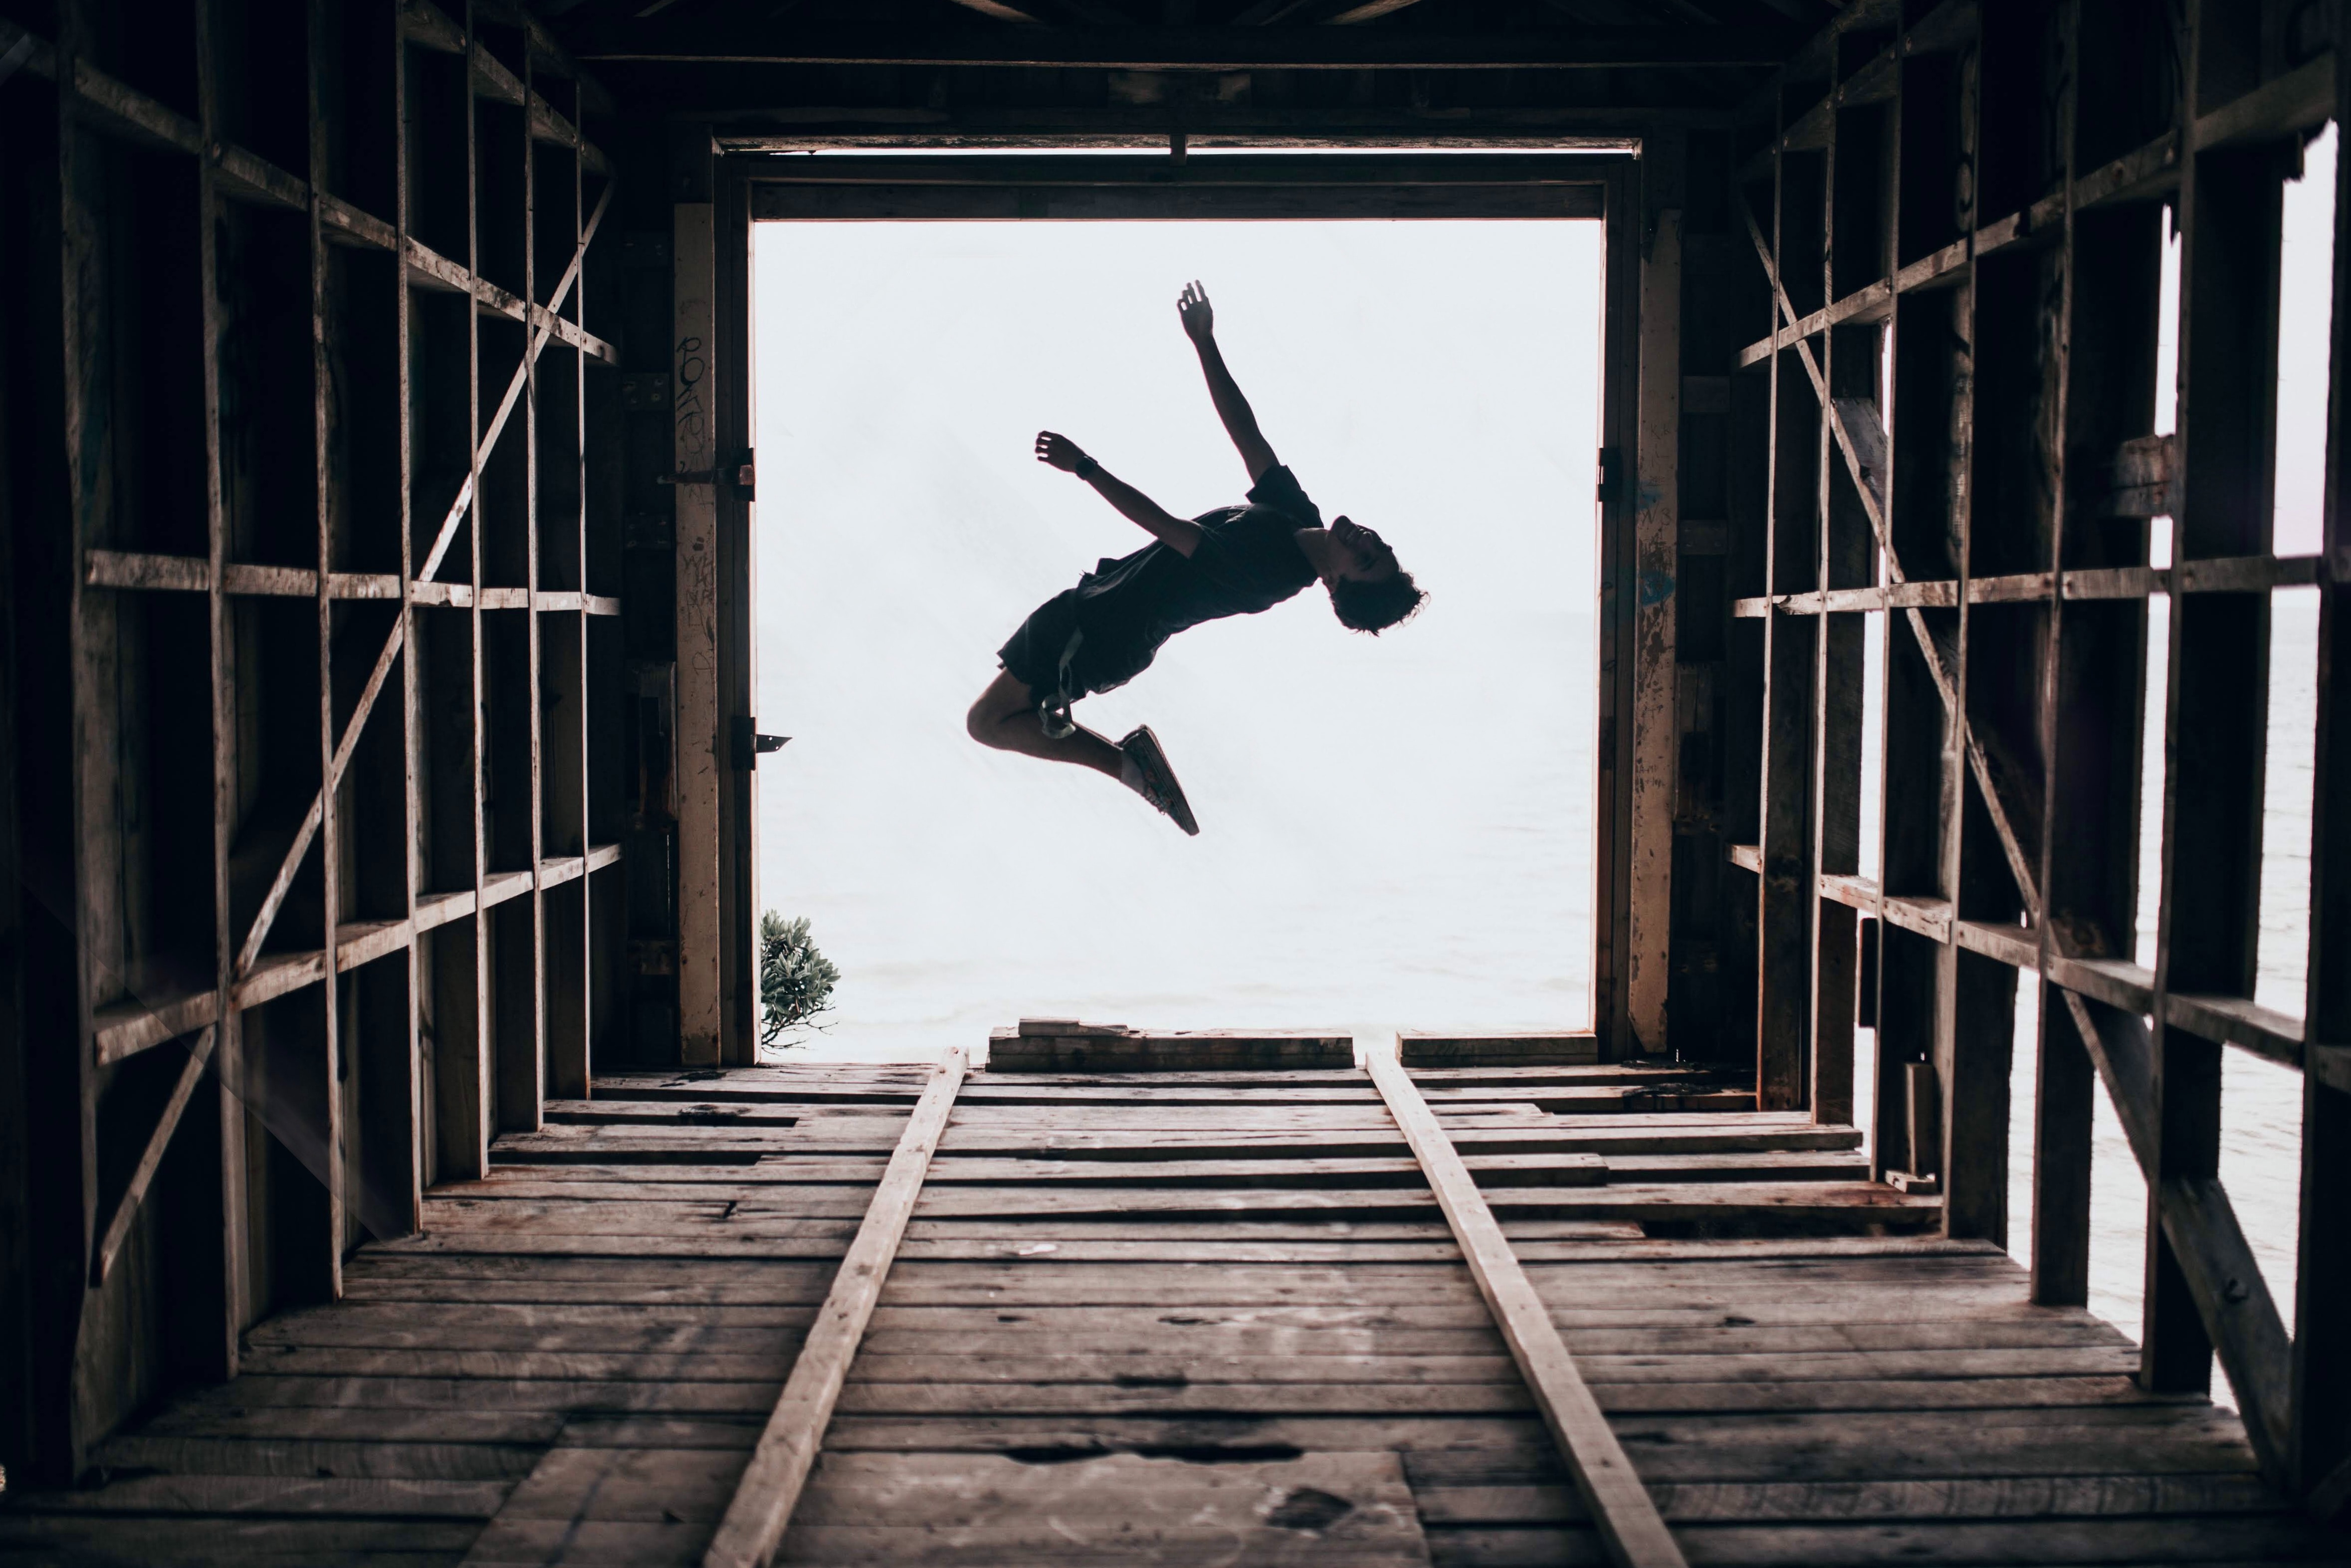 Practice film editing with Parkour Sports Footage – EditStock